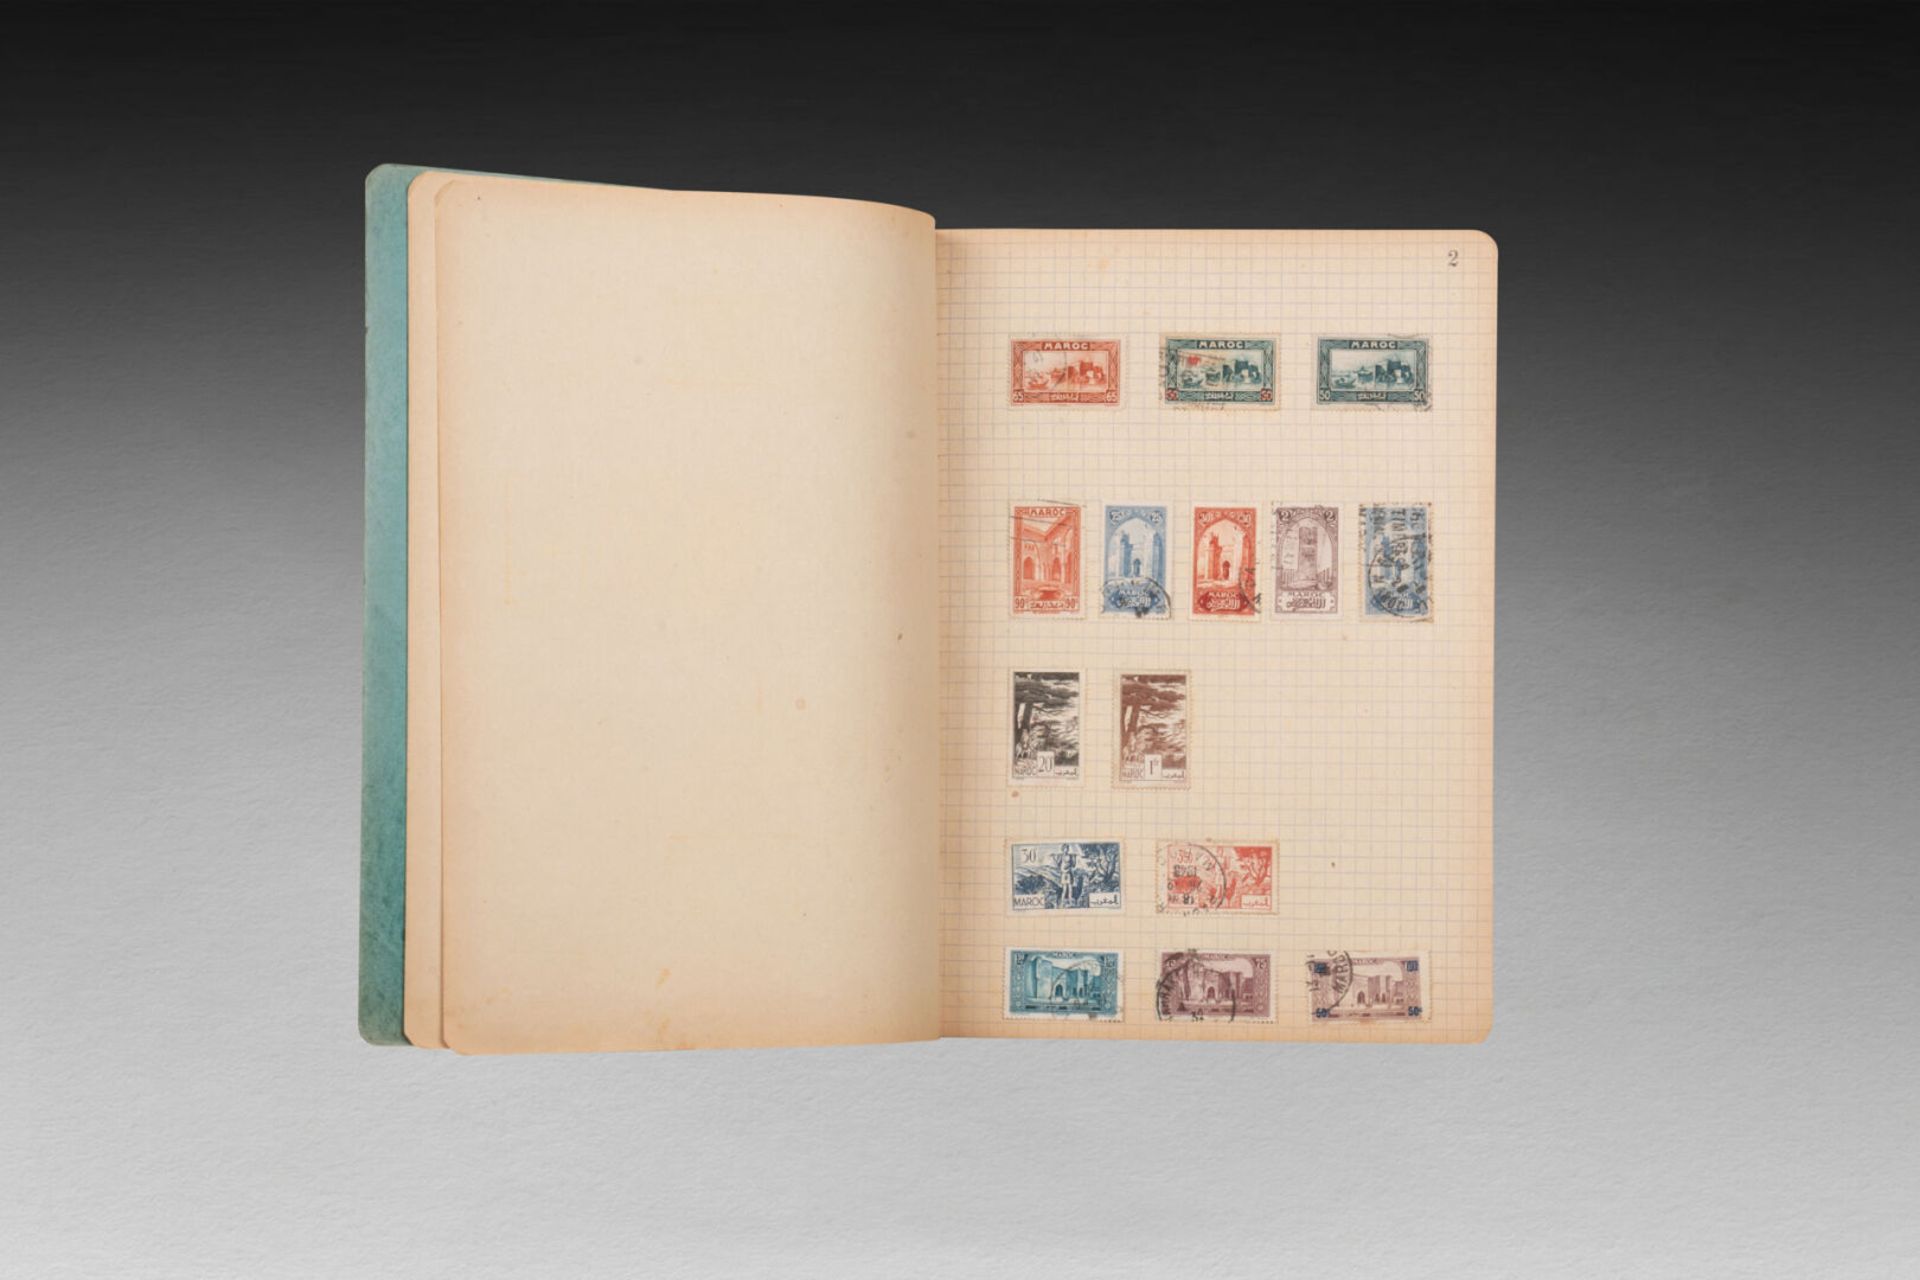 TIMBRES - Image 30 of 57